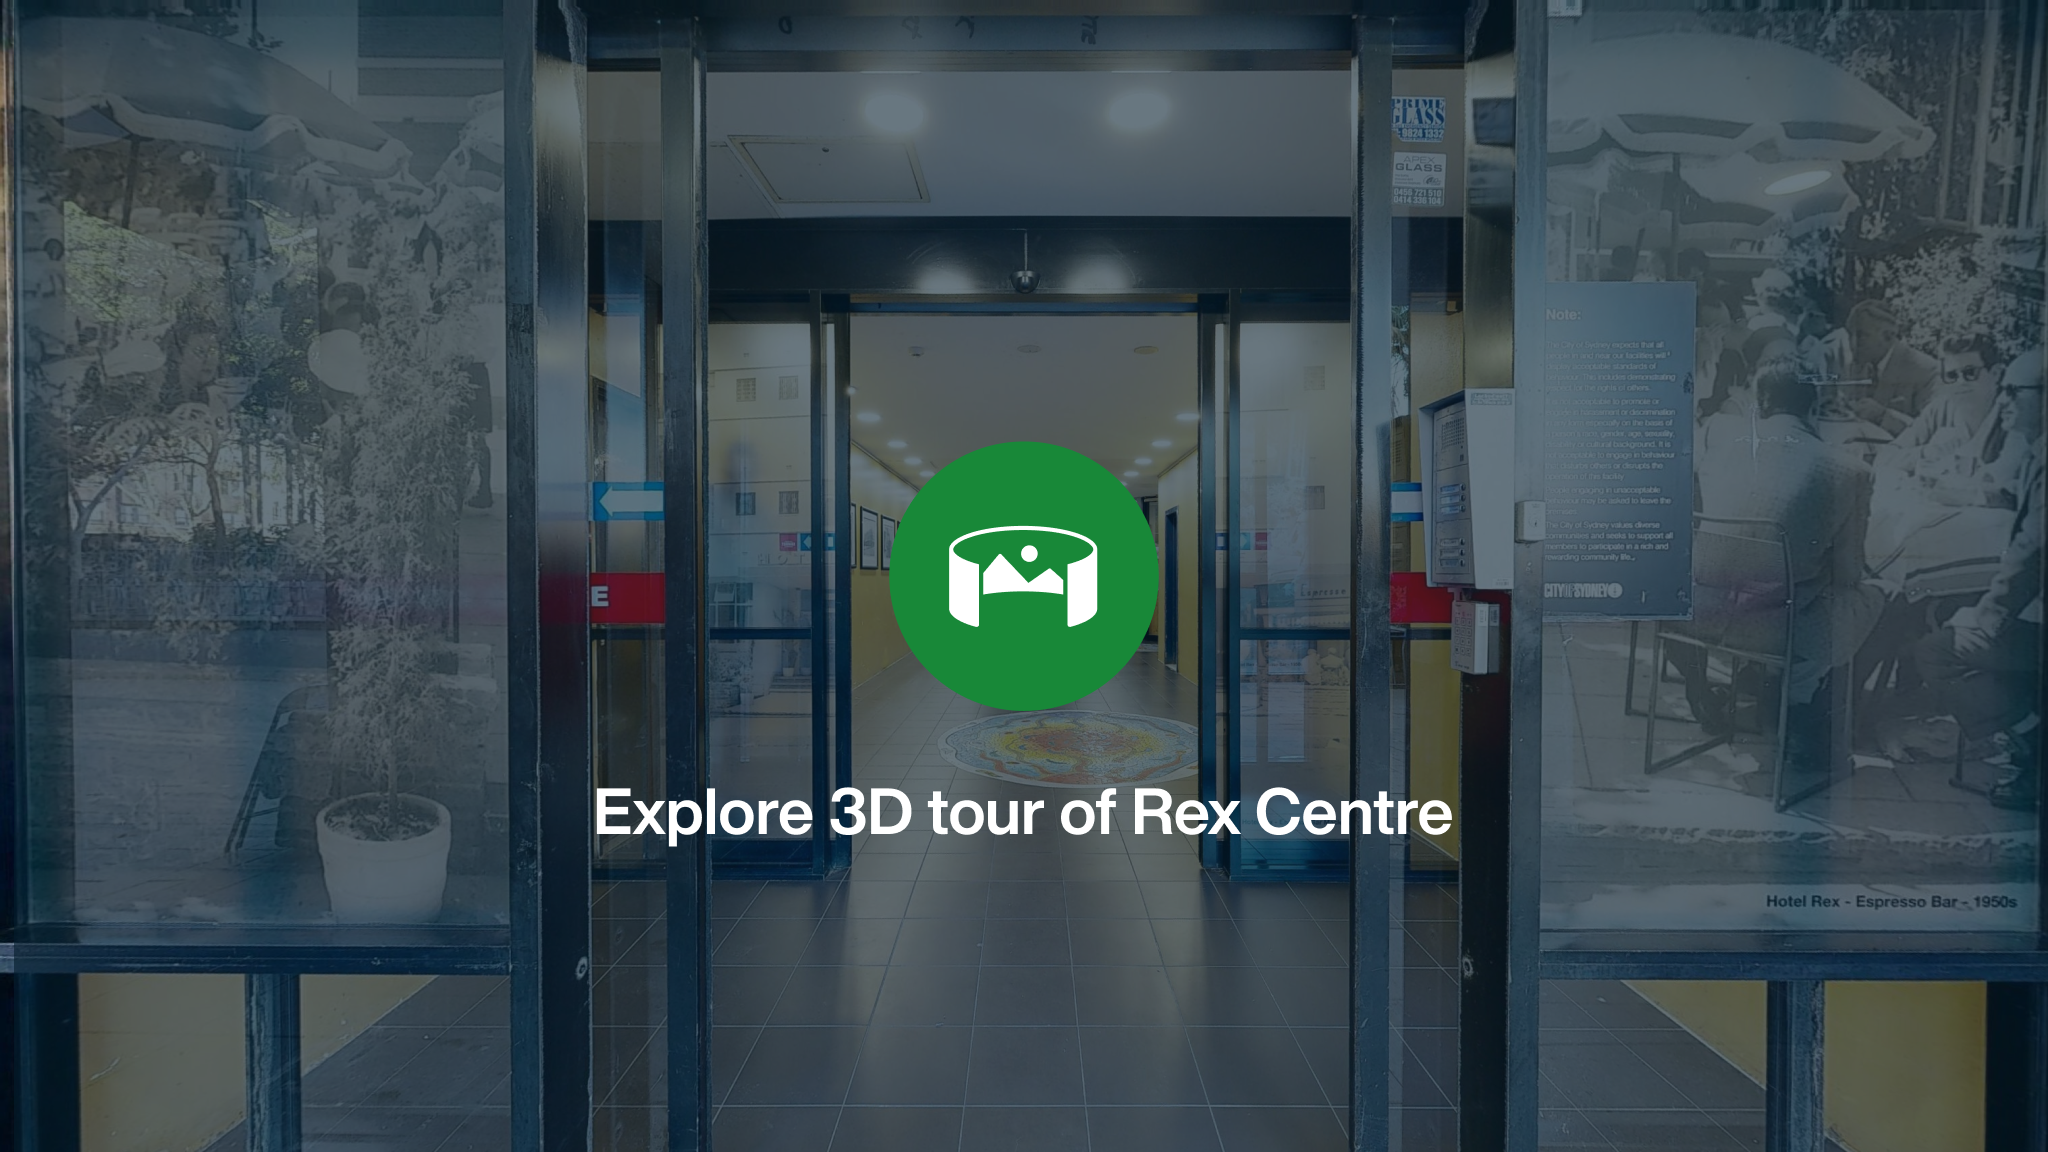 The front entrance to Rex Centre overlayed with a green icon and the words Explore 3D tour of Rex Centre.